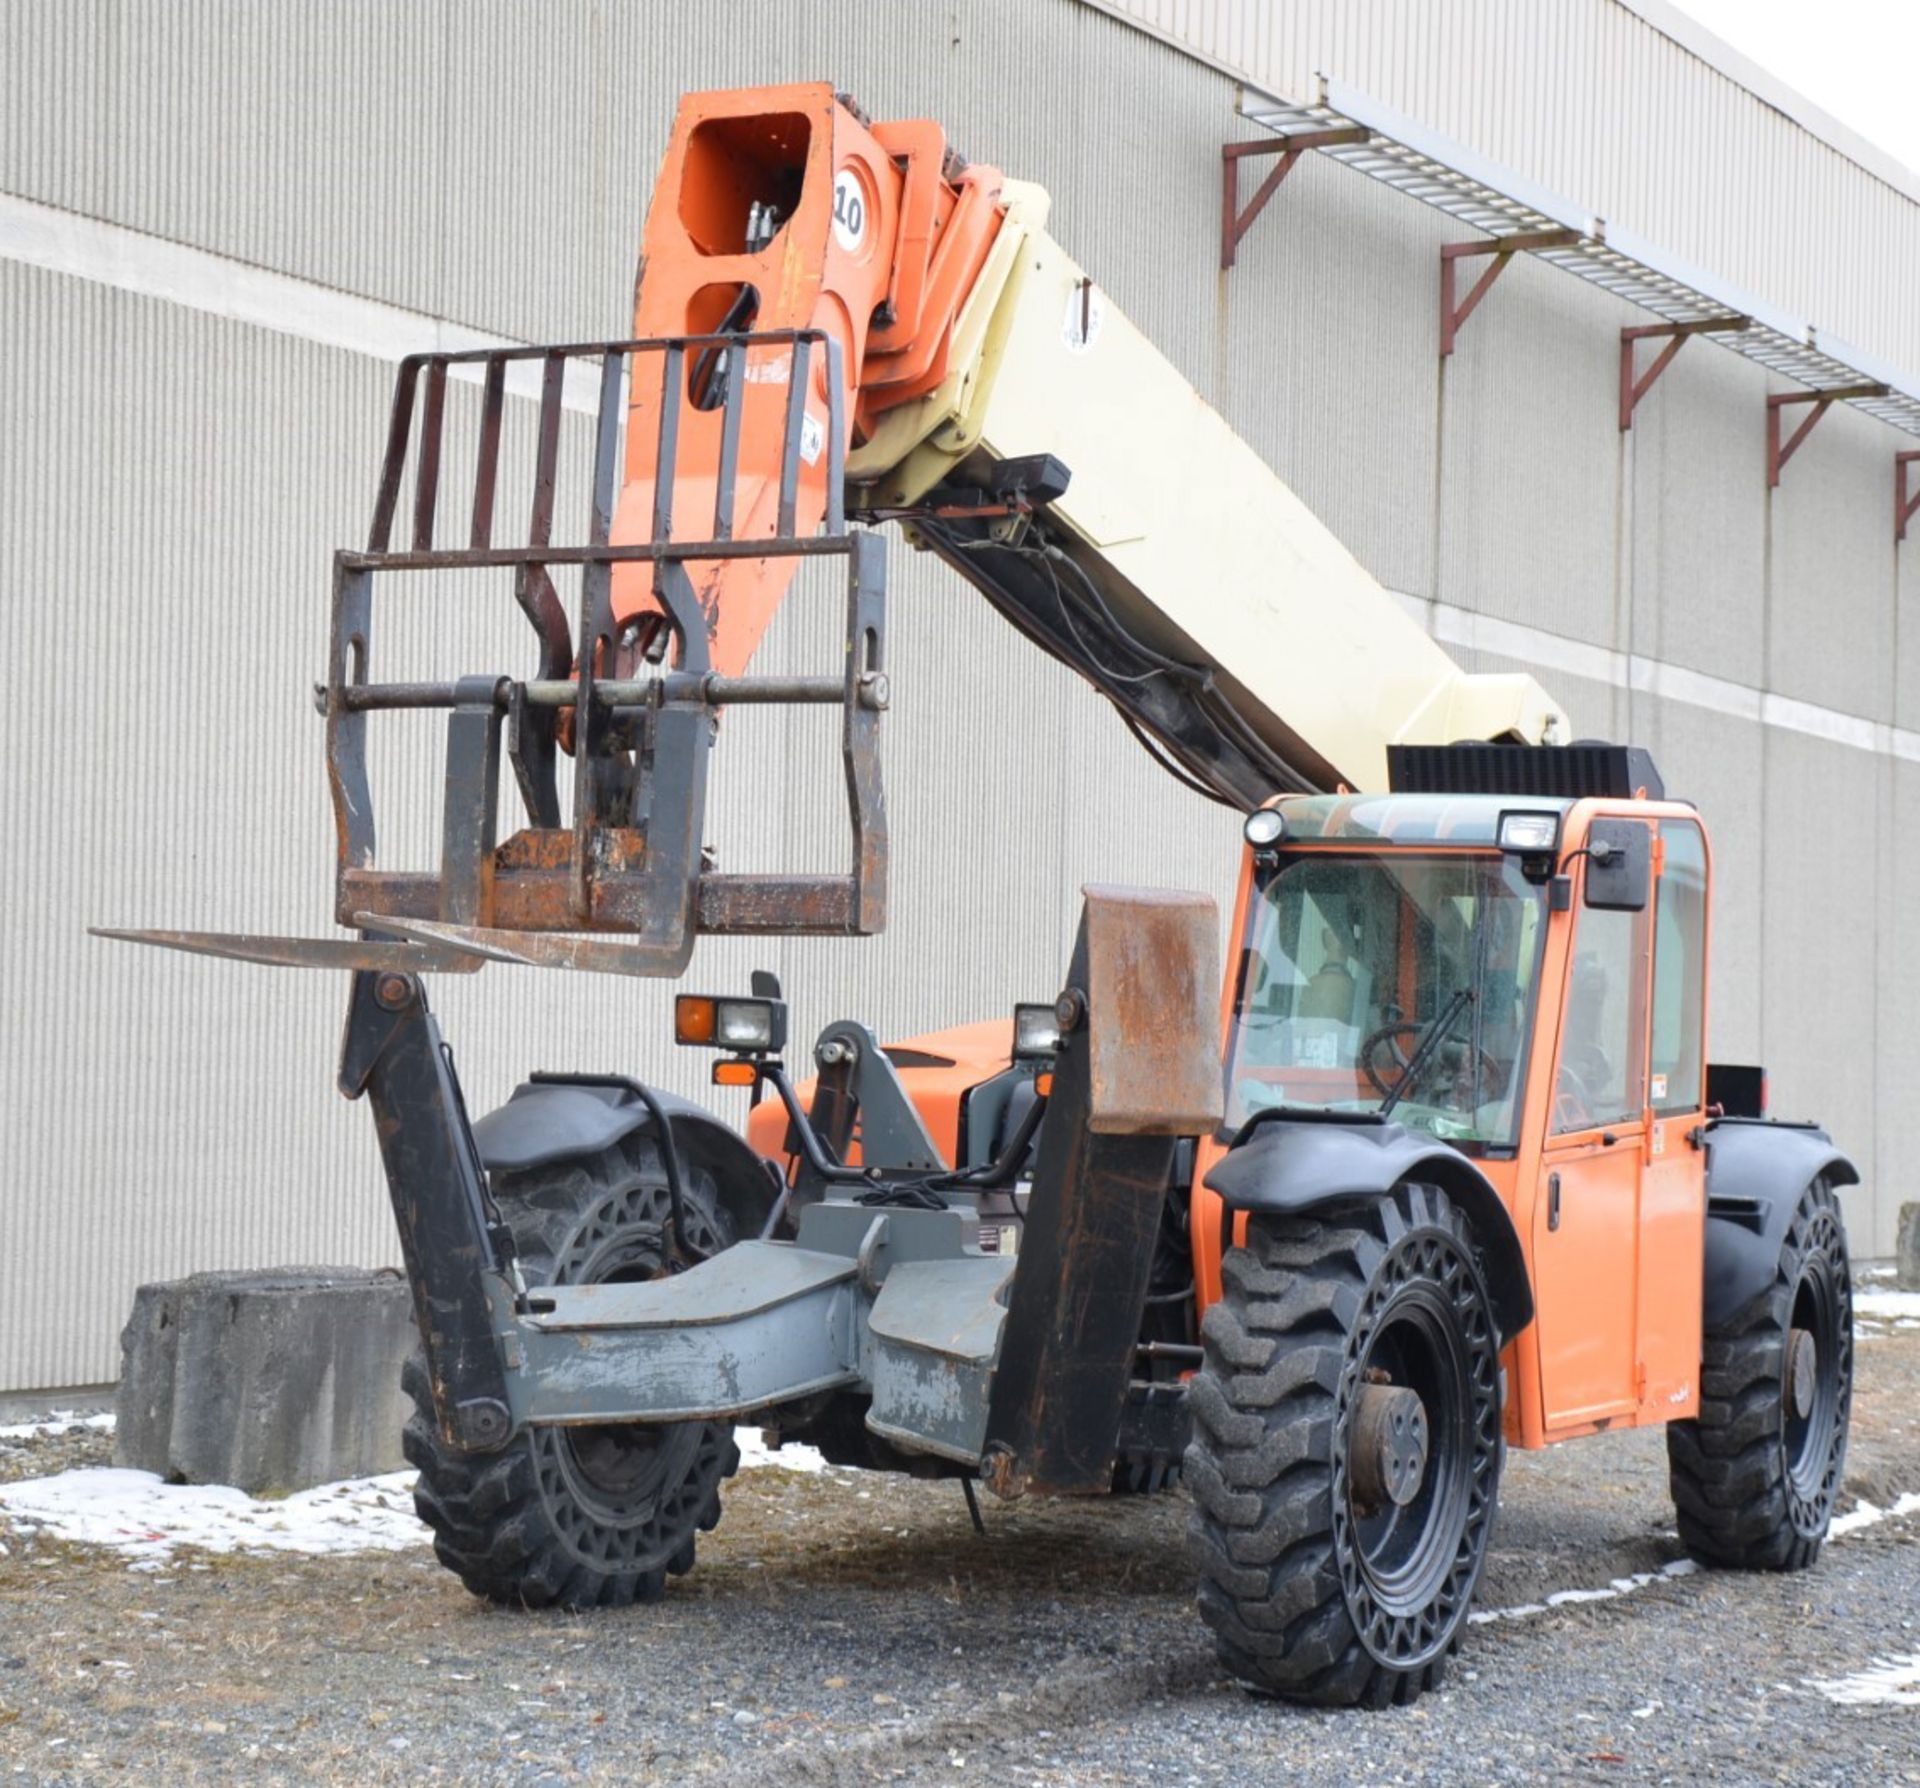 JLG (2011) G10-55A 10,000 LBS. CAPACITY DIESEL TELEHANDLER FORKLIFT WITH 56' MAX VERTICAL LIFT, - Image 7 of 23